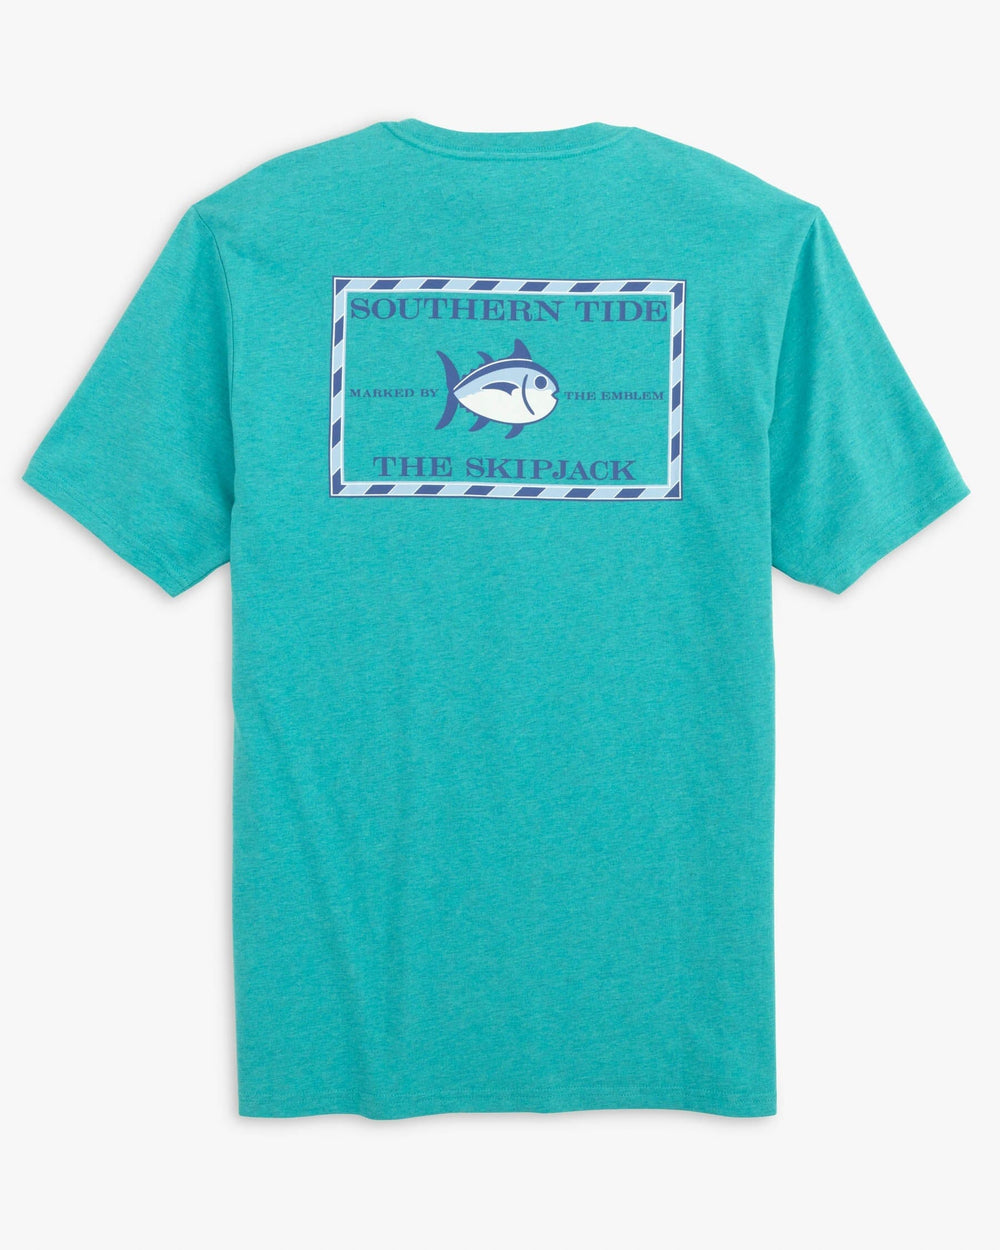 The front view of the Southern Tide Heather Original Skipjack T-Shirt 2 by Southern Tide - Heather Teal Depths